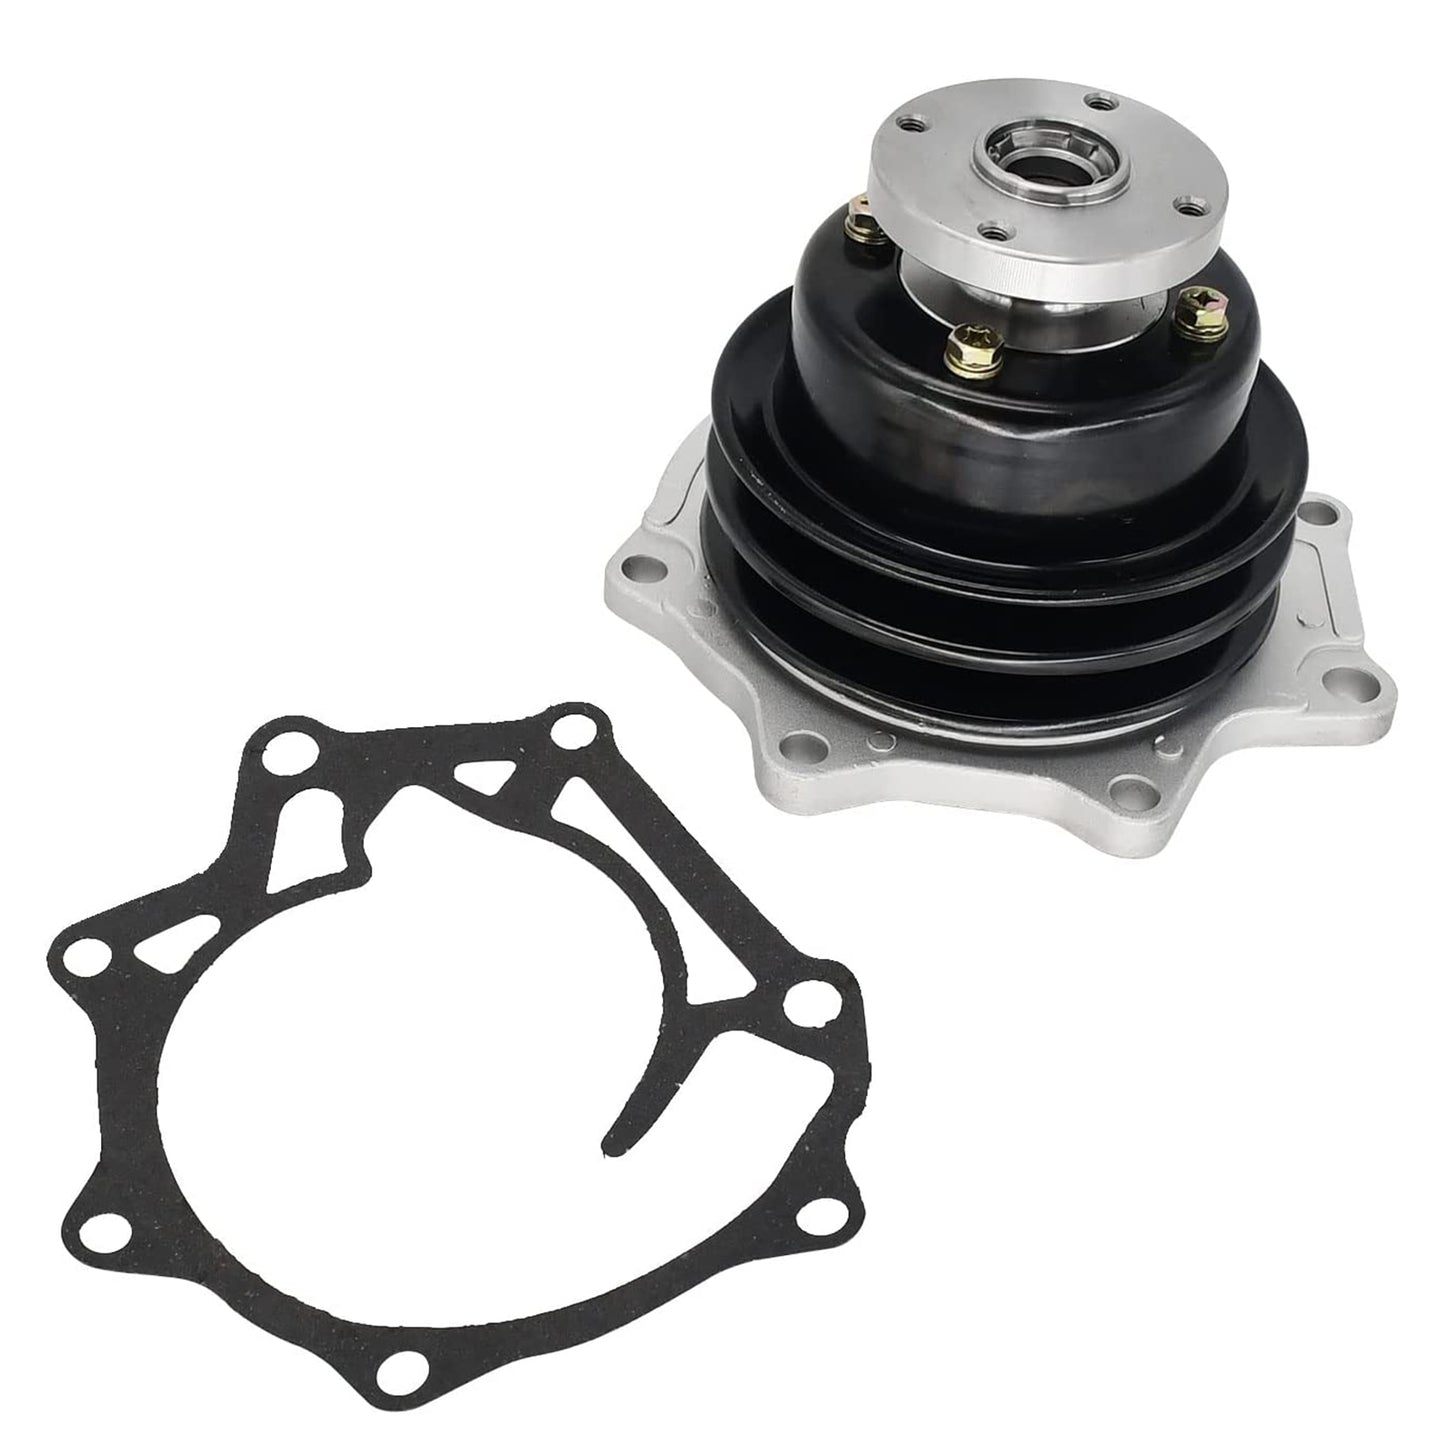 A21010-40K05 Water Pump With Gasket Compatible With Nissan TD27 TD27T BD30 Engine